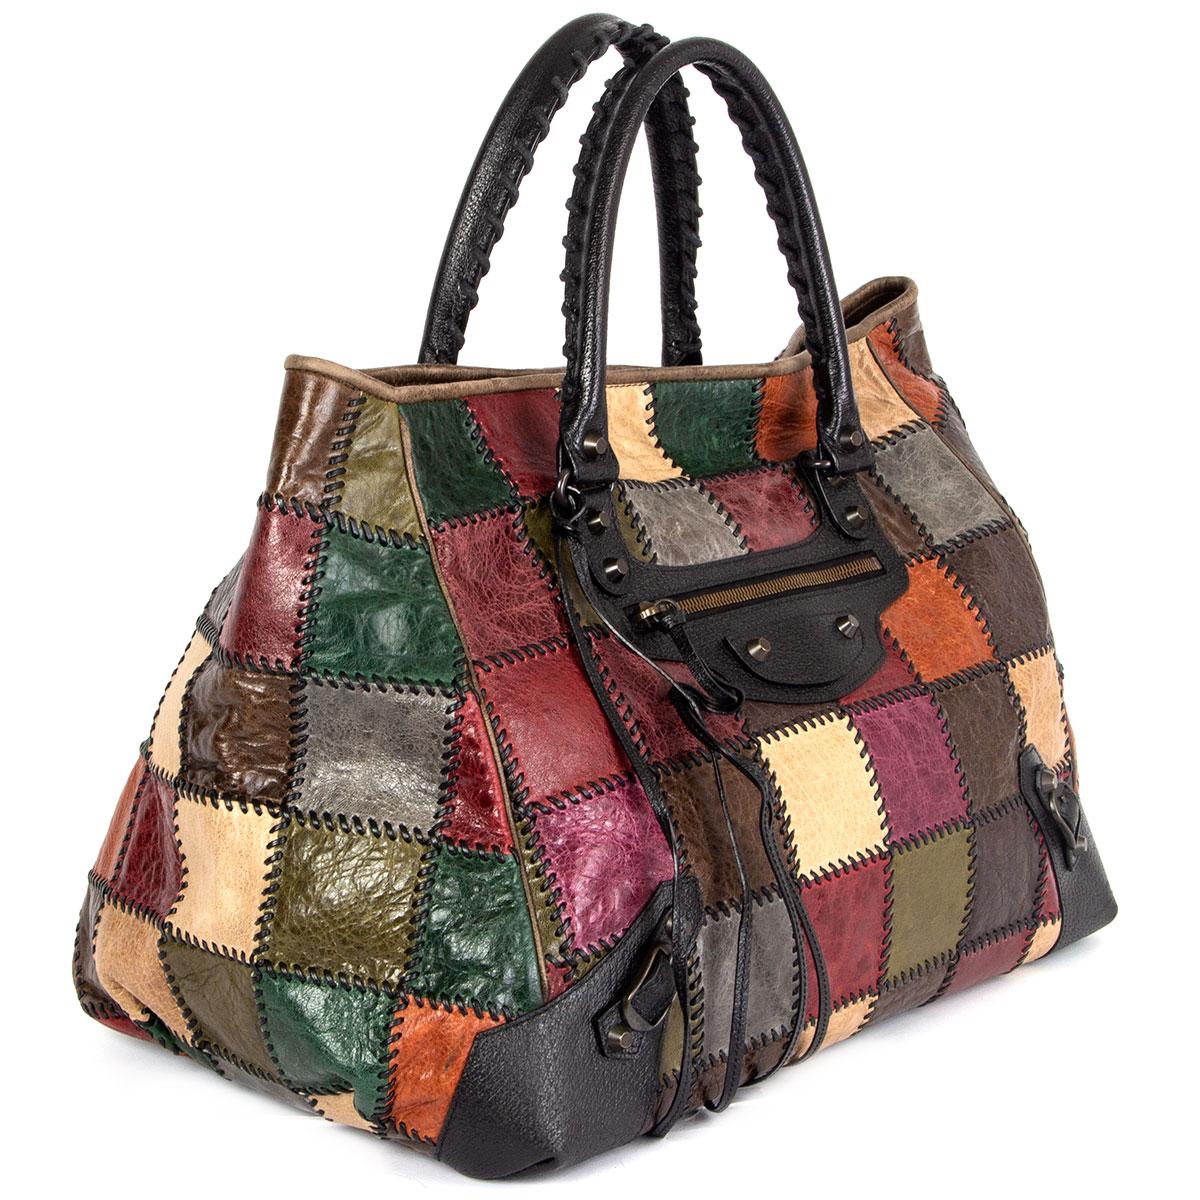 100% authentic Balenciaga 'Arena' patchwork tote bag in sand, brown, olive green, eggplant, forest green, grey, cognac and black grained calfskin featuring gunmetal hardware. Opens with a magnetic button on top and is lined in black canvas with one